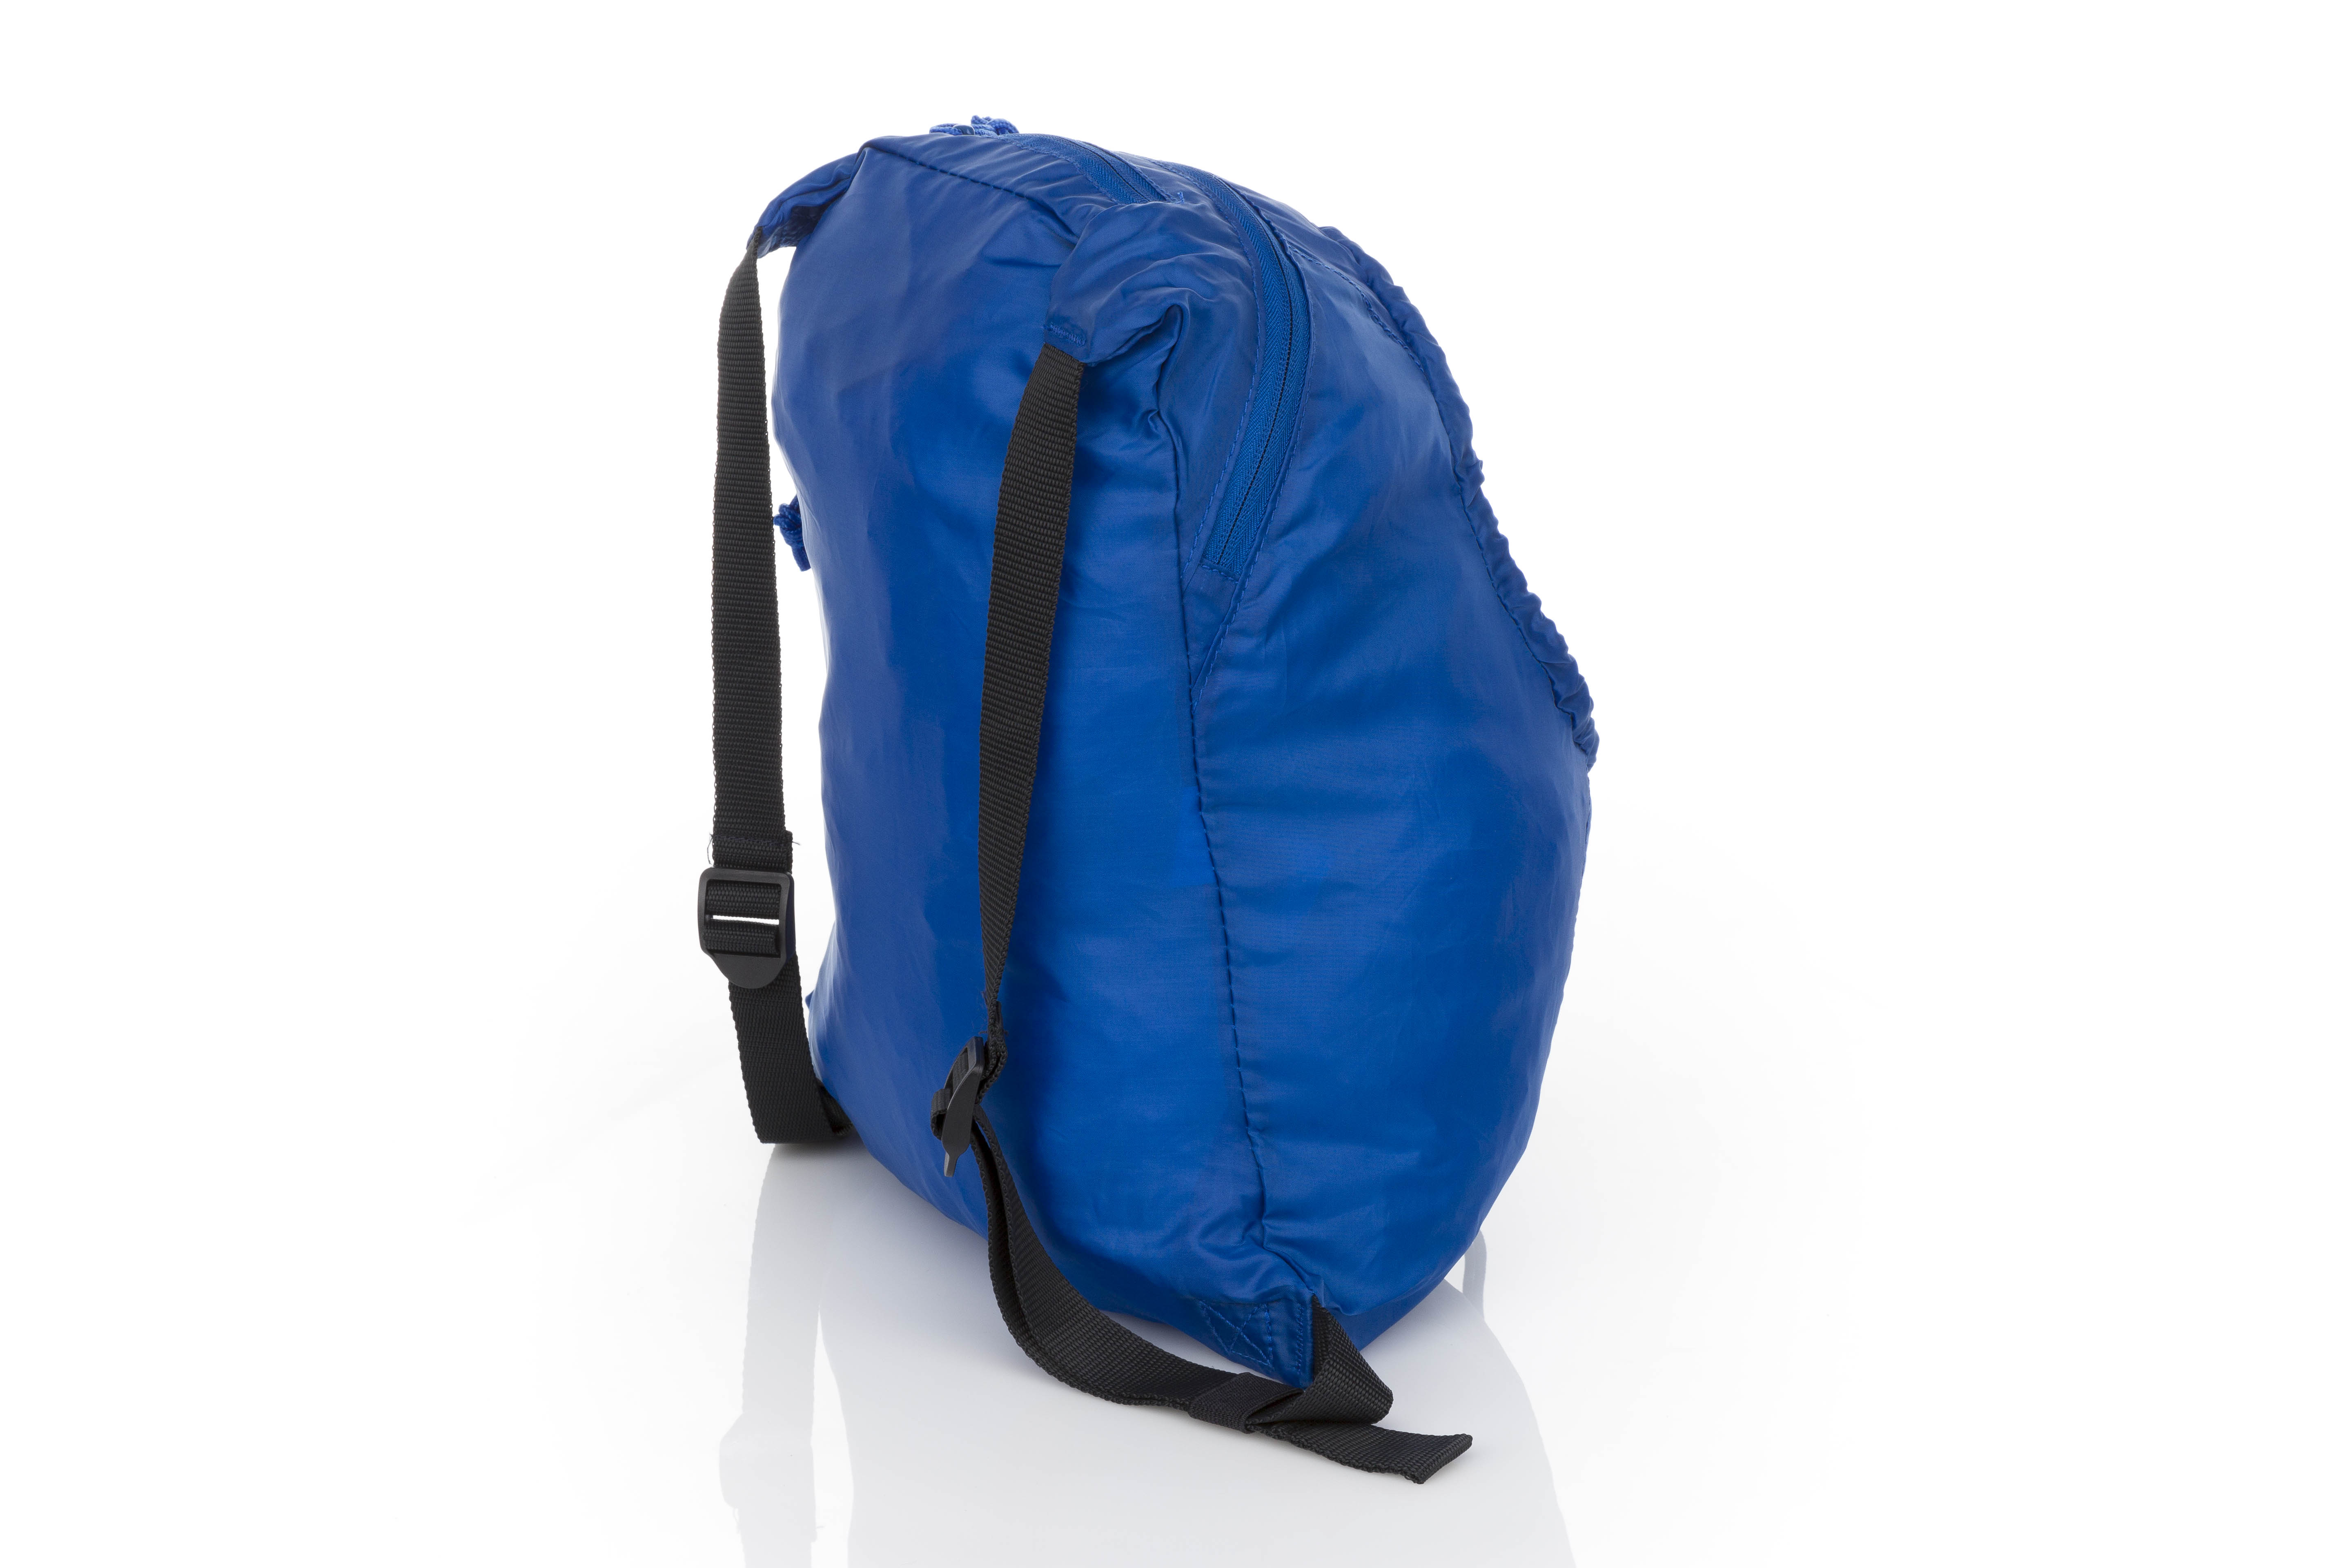 Outdoor Products Packable 14.9 L Backpack, Blue, Unisex, Adult, Teen,  Polyester 